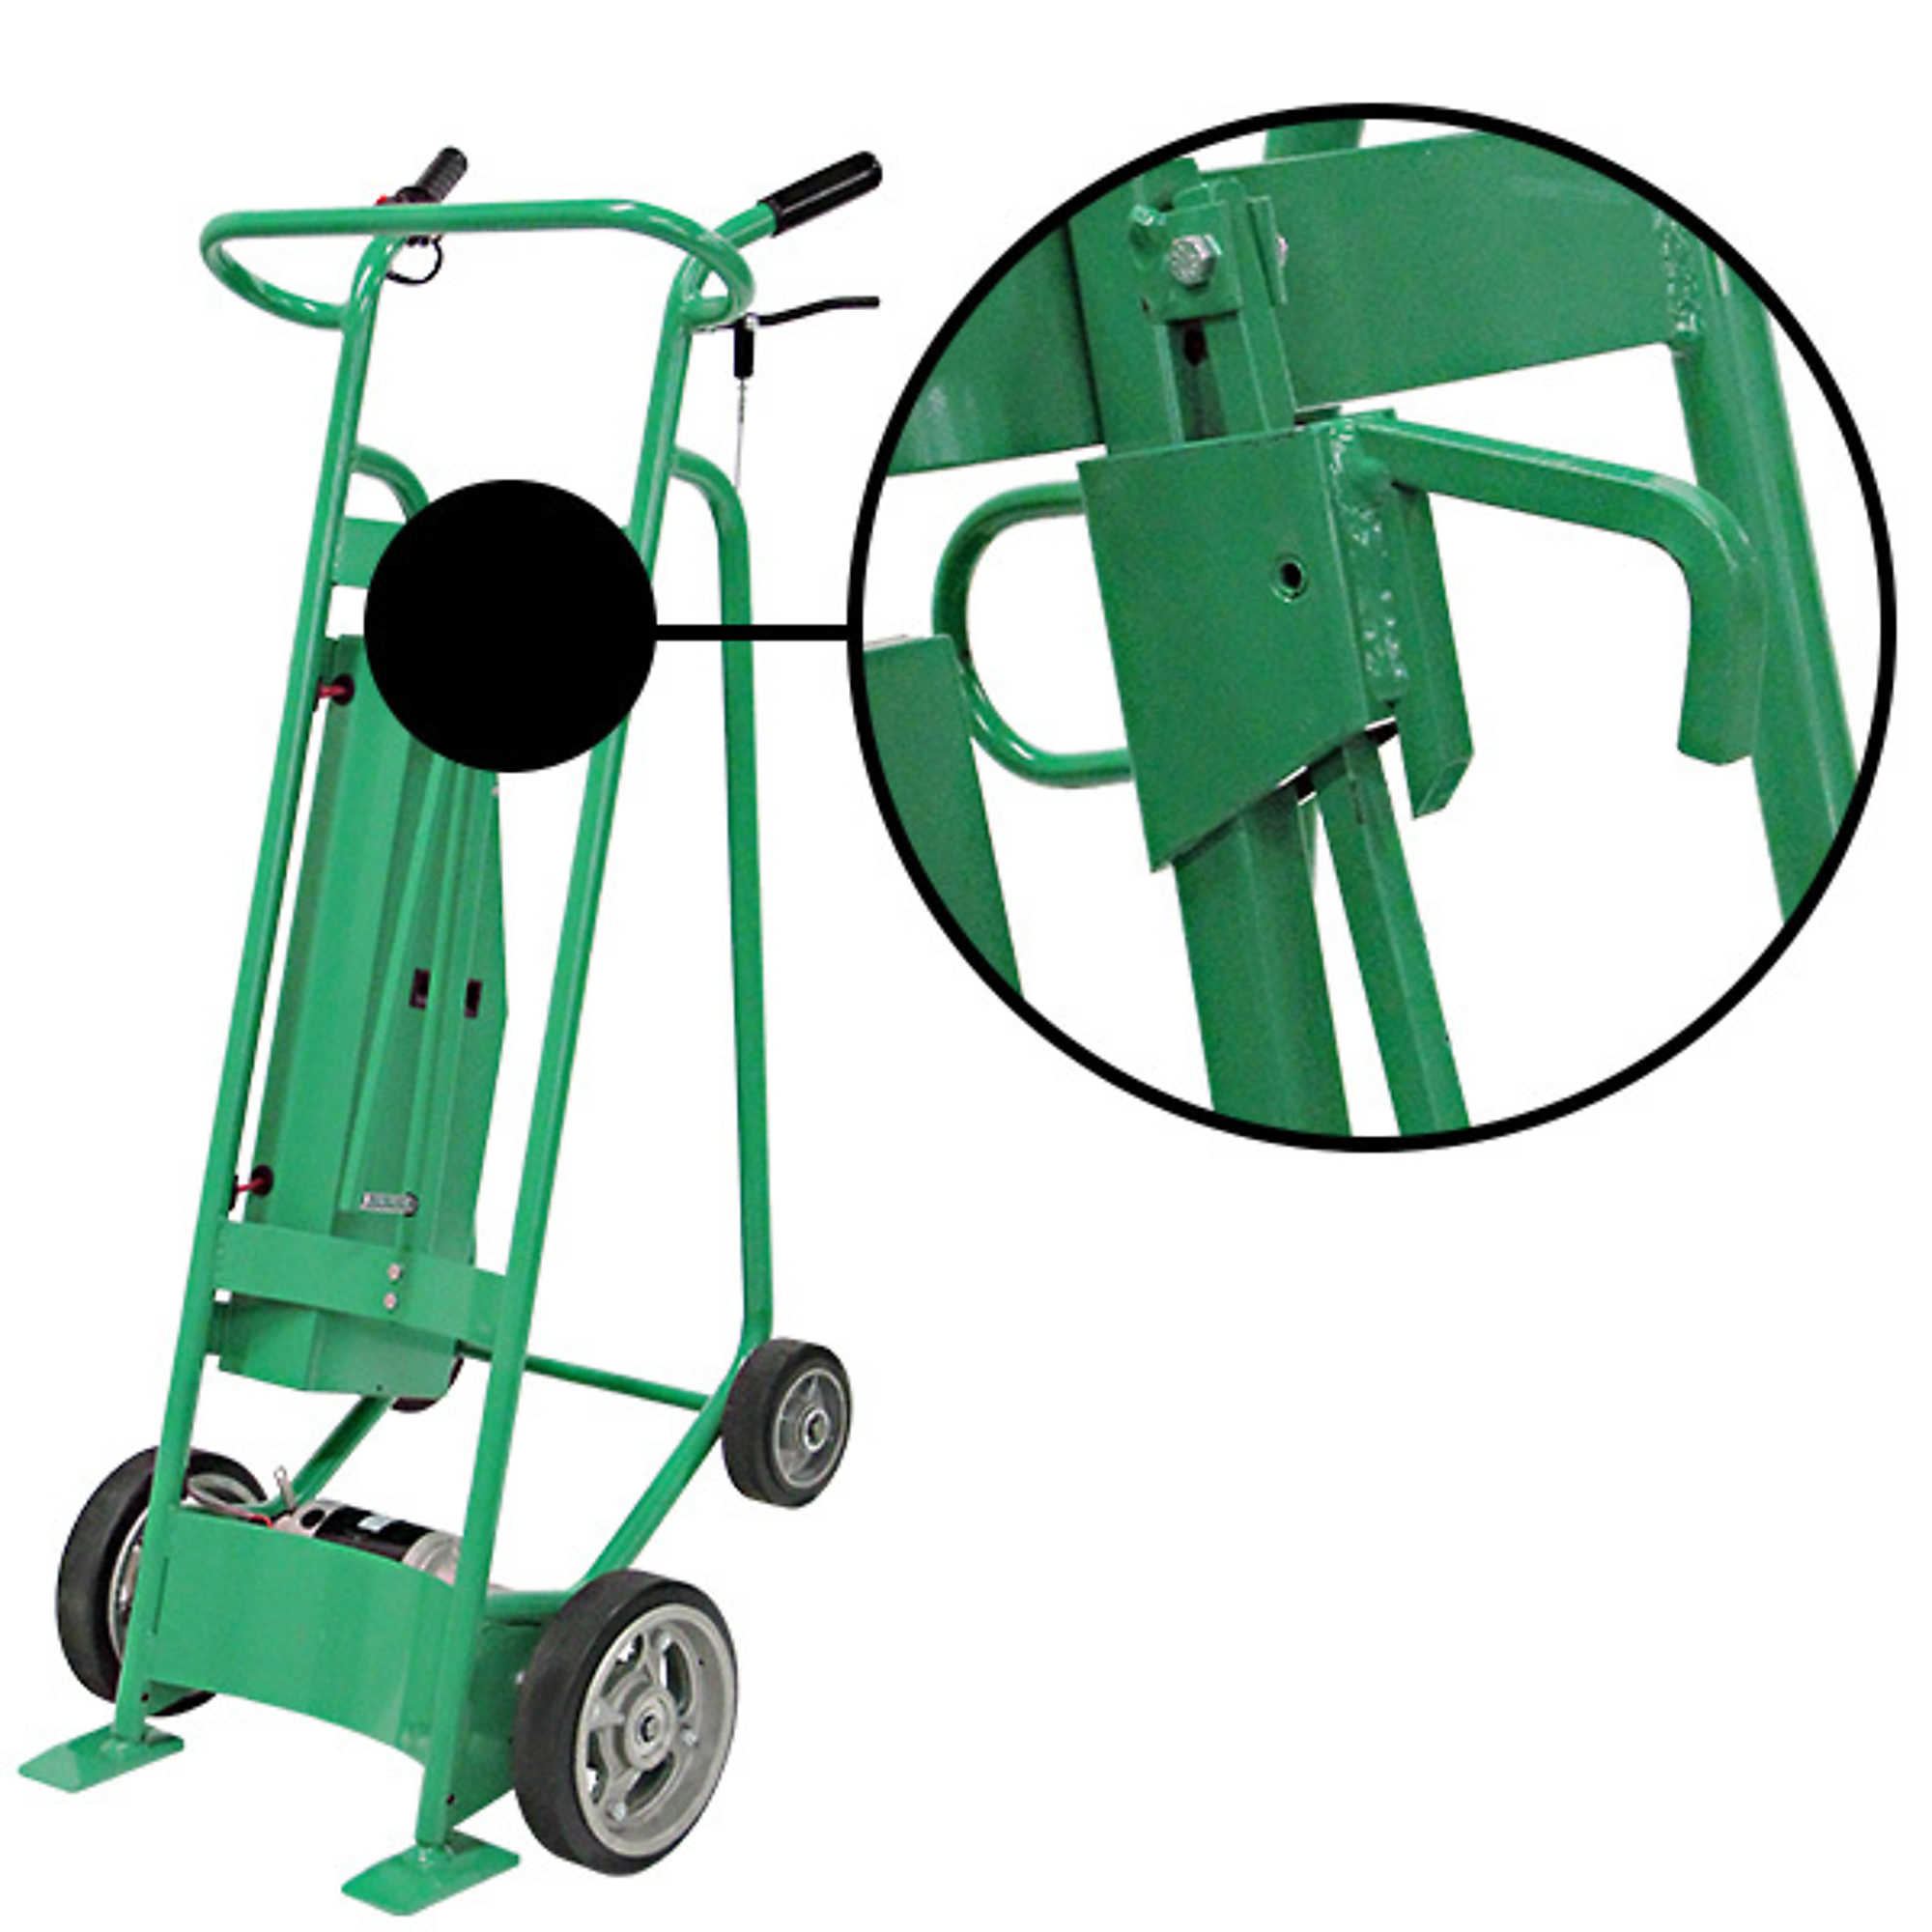 Valley Craft, Powered Drum Hand Truck, Load Capacity 800 lb, Height 60 in, Material Steel, Model F89503L